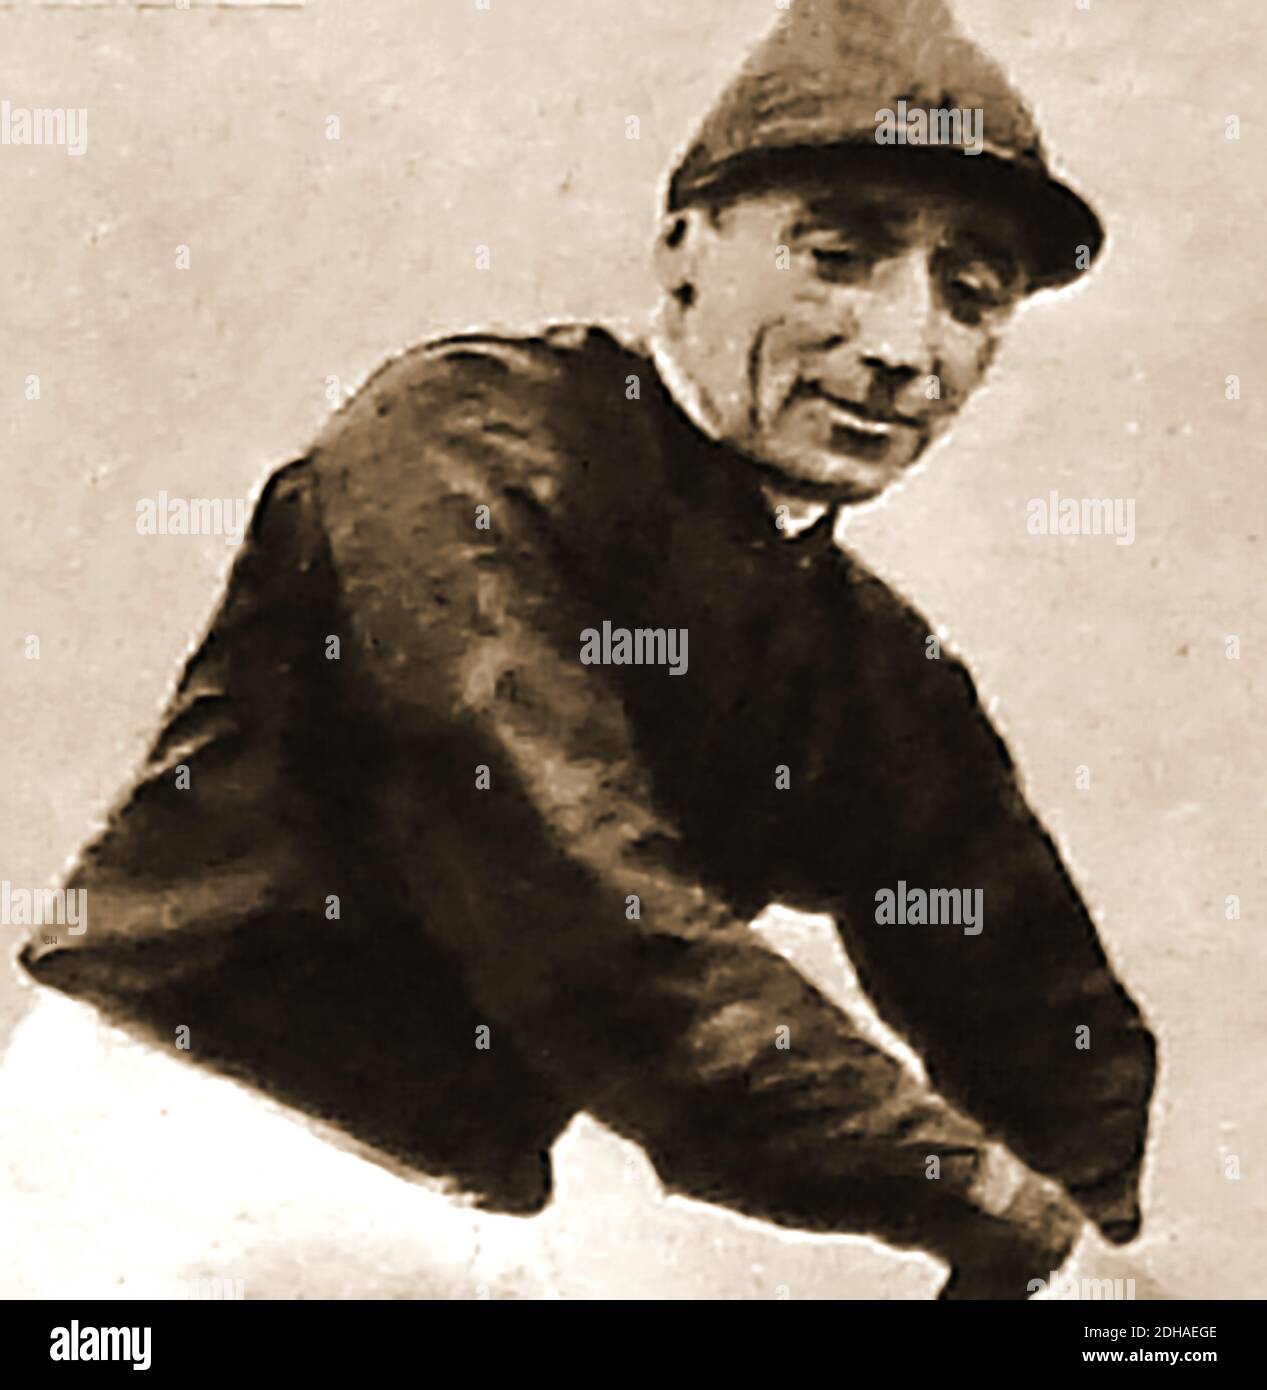 Jockey, Danny Maher, 3 times winner of the English Derby horse race. Daniel Aloysius Maher ( 1881 –  1916) was an American Hall of Fame jockey who was also  a Champion jockey in Great Britain. was America's leading jockey in 1898. He died prematurely aged  35 of consumption (tuberculosis) Stock Photo